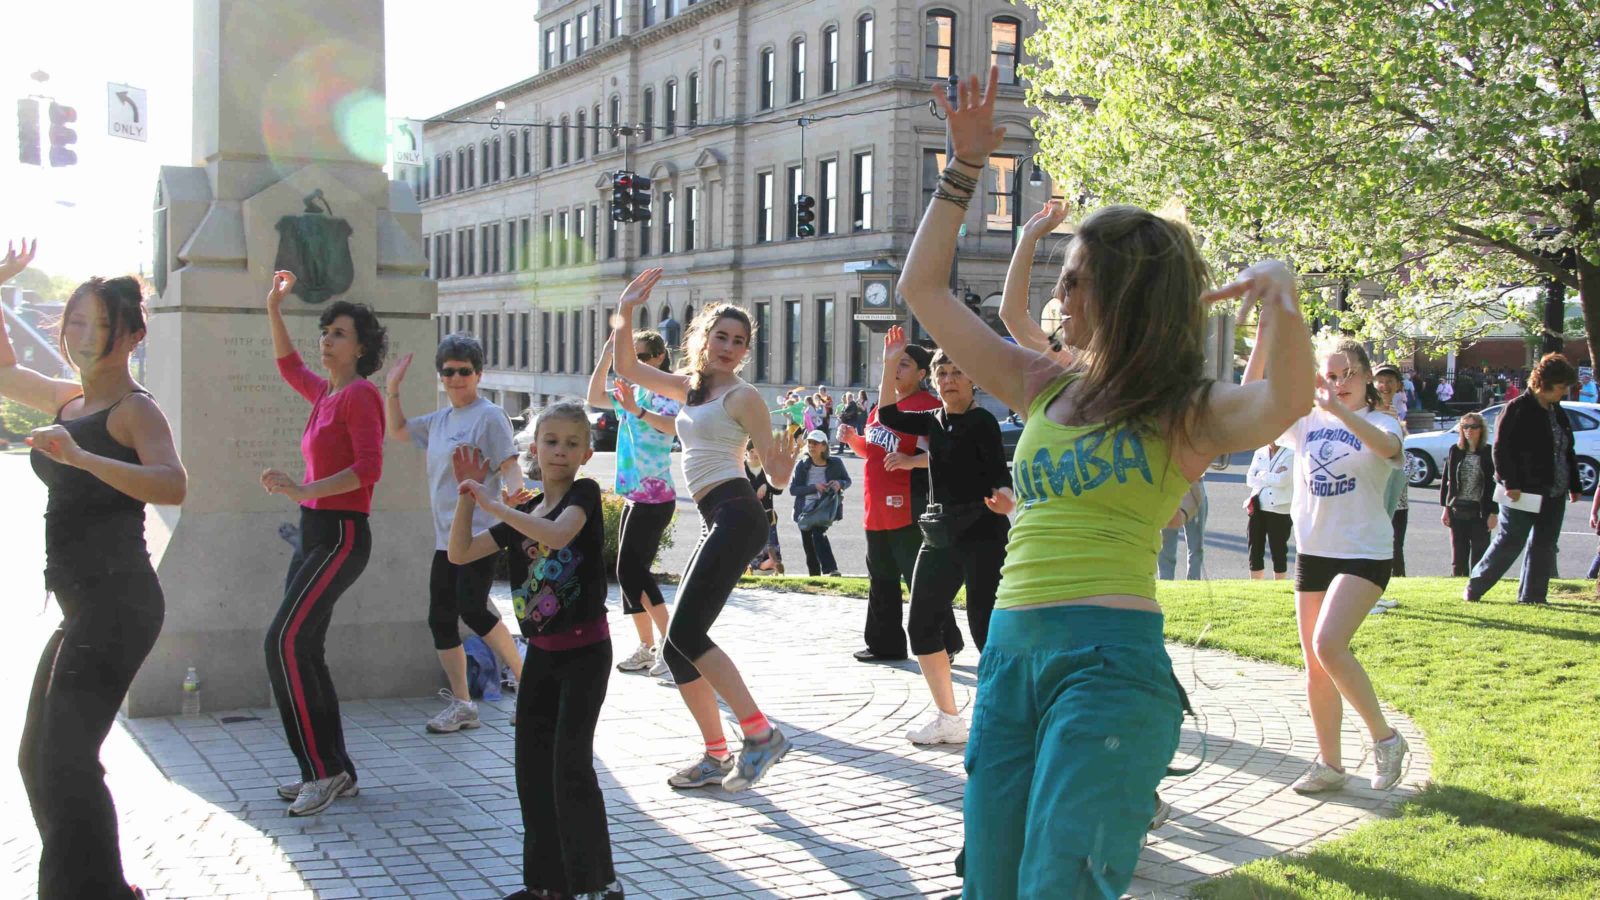 Zumba livens up a Third Thursday street festival in downtown Pittsfield.